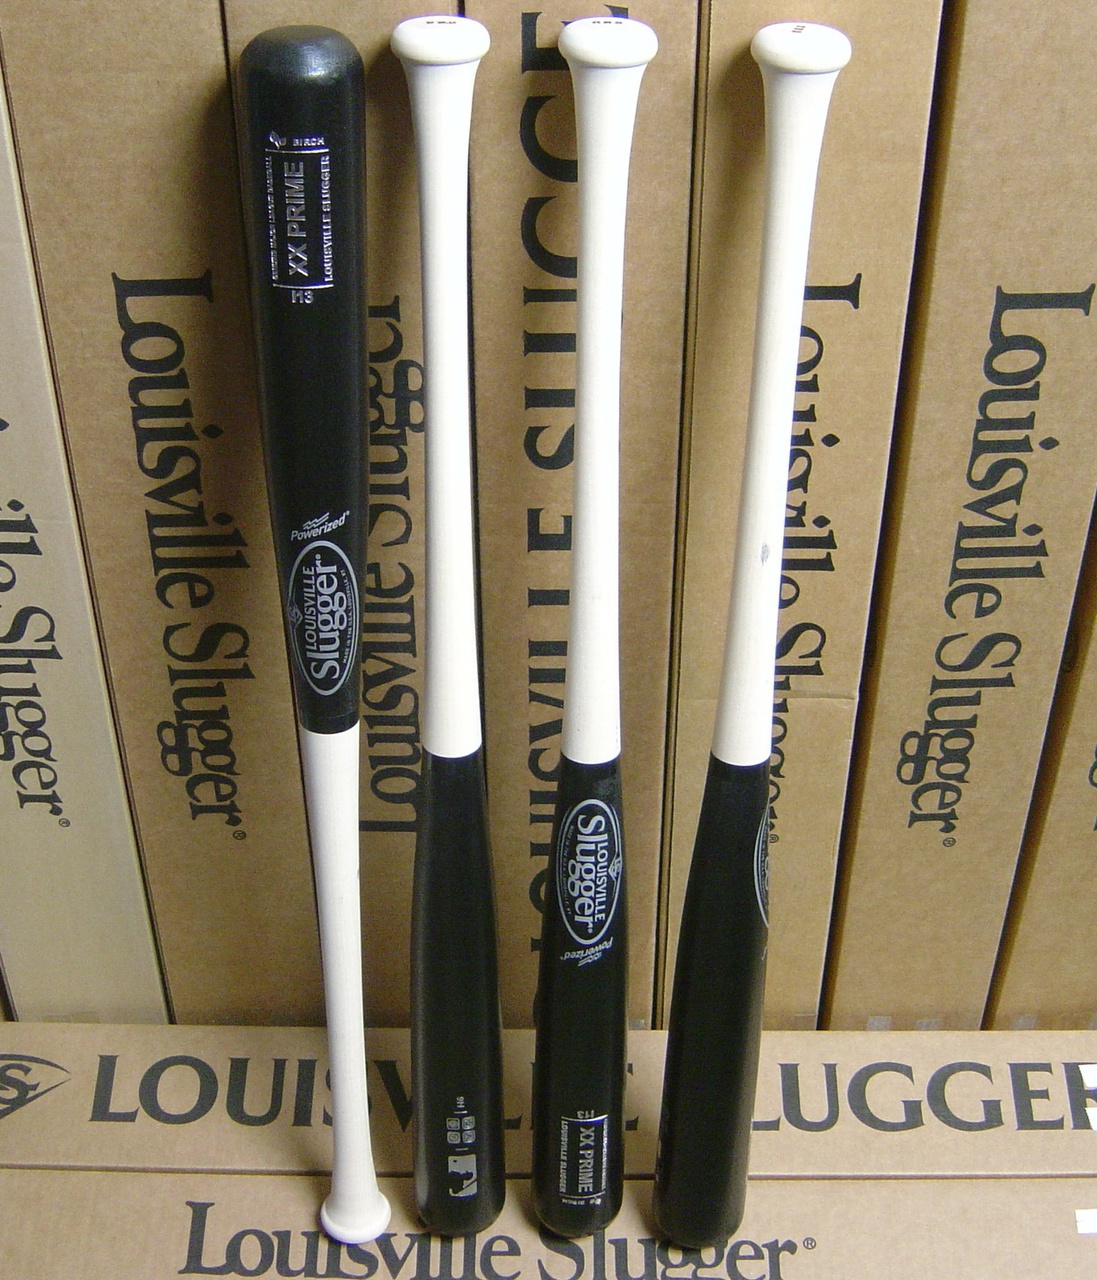 Louisville Slugger XX Prime Birch Wood. 33.5 inches not cupped. For over 125 years, Louisville Slugger wood bats have been in the hands of some of the game's biggest stars. Still to this day, more teams and players swing Louisville Slugger than any other brand.  The ball players XX Prime Birch model features MLB Prime grade Birch wood with a slight defect, a pro cupped end and a large barrel. The XX Prime bats are X-Out models of the same MLB Prime bats the pros are swinging. Birch is lighter in weight than maple so you can still have a large barrel bat with strong wood without sacrificing on quality. If you want to get the most out of your game this season, swing what the pros swing. 